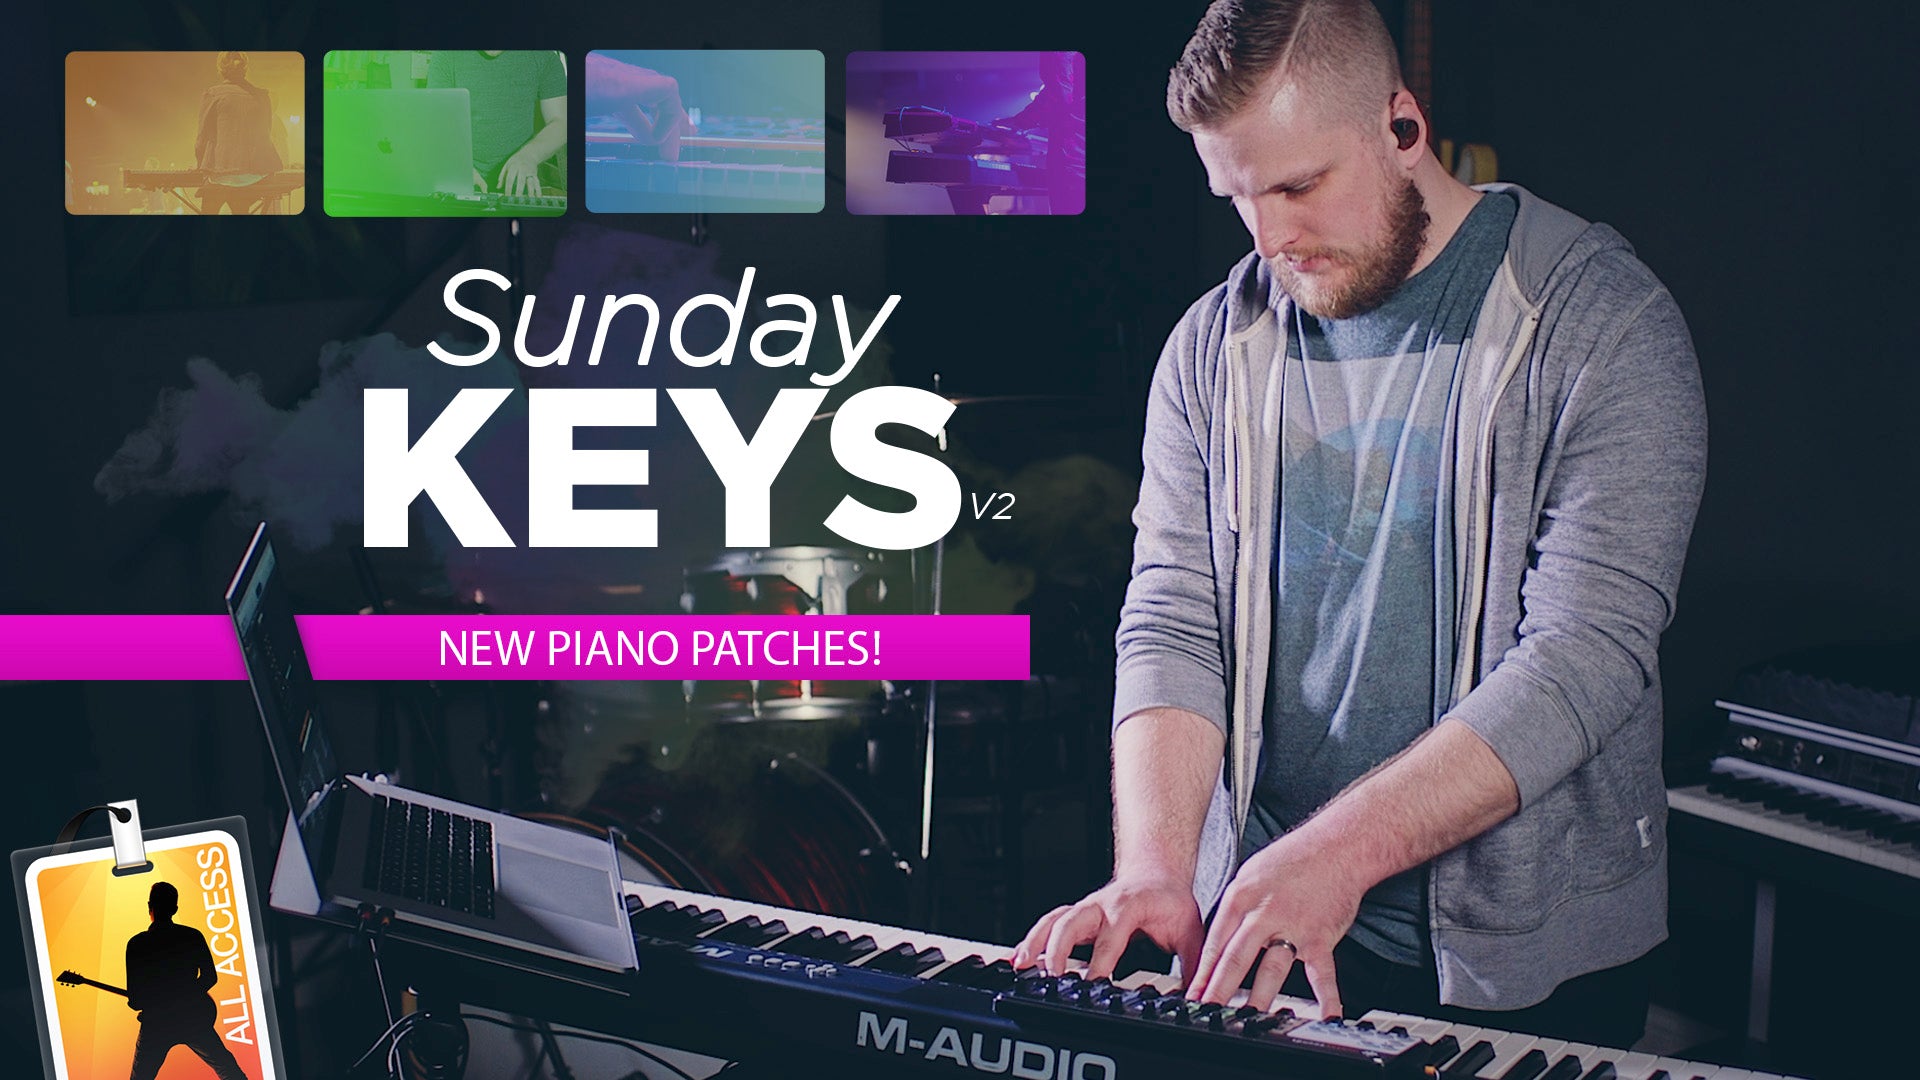 New Piano Patches in Sunday Keys Version 2!